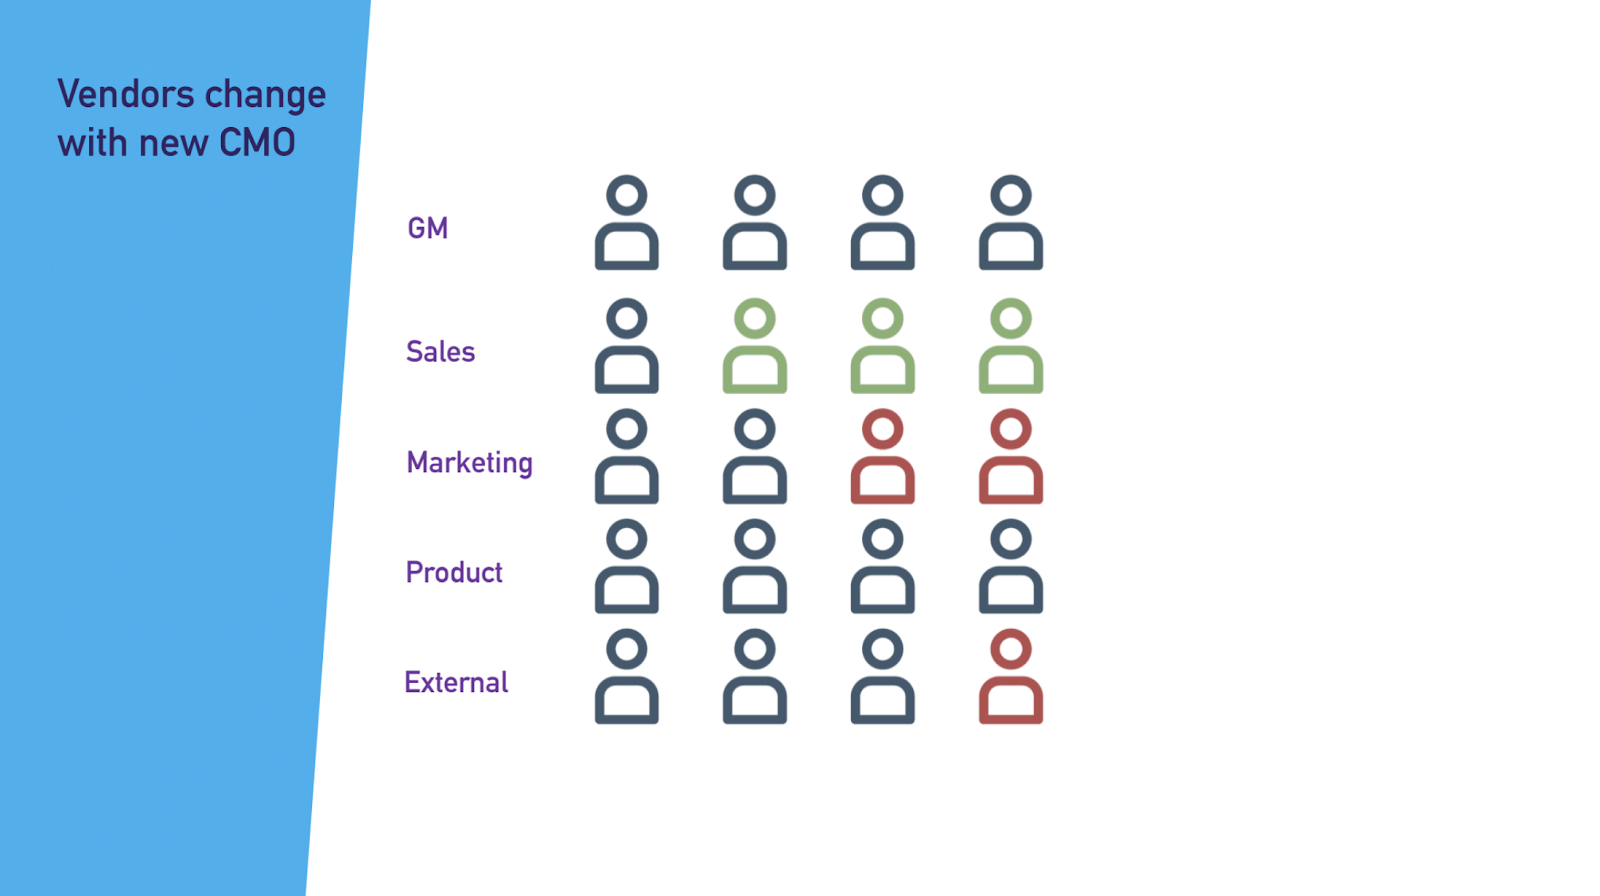 Graphic showing how vendors change with a new CMO.